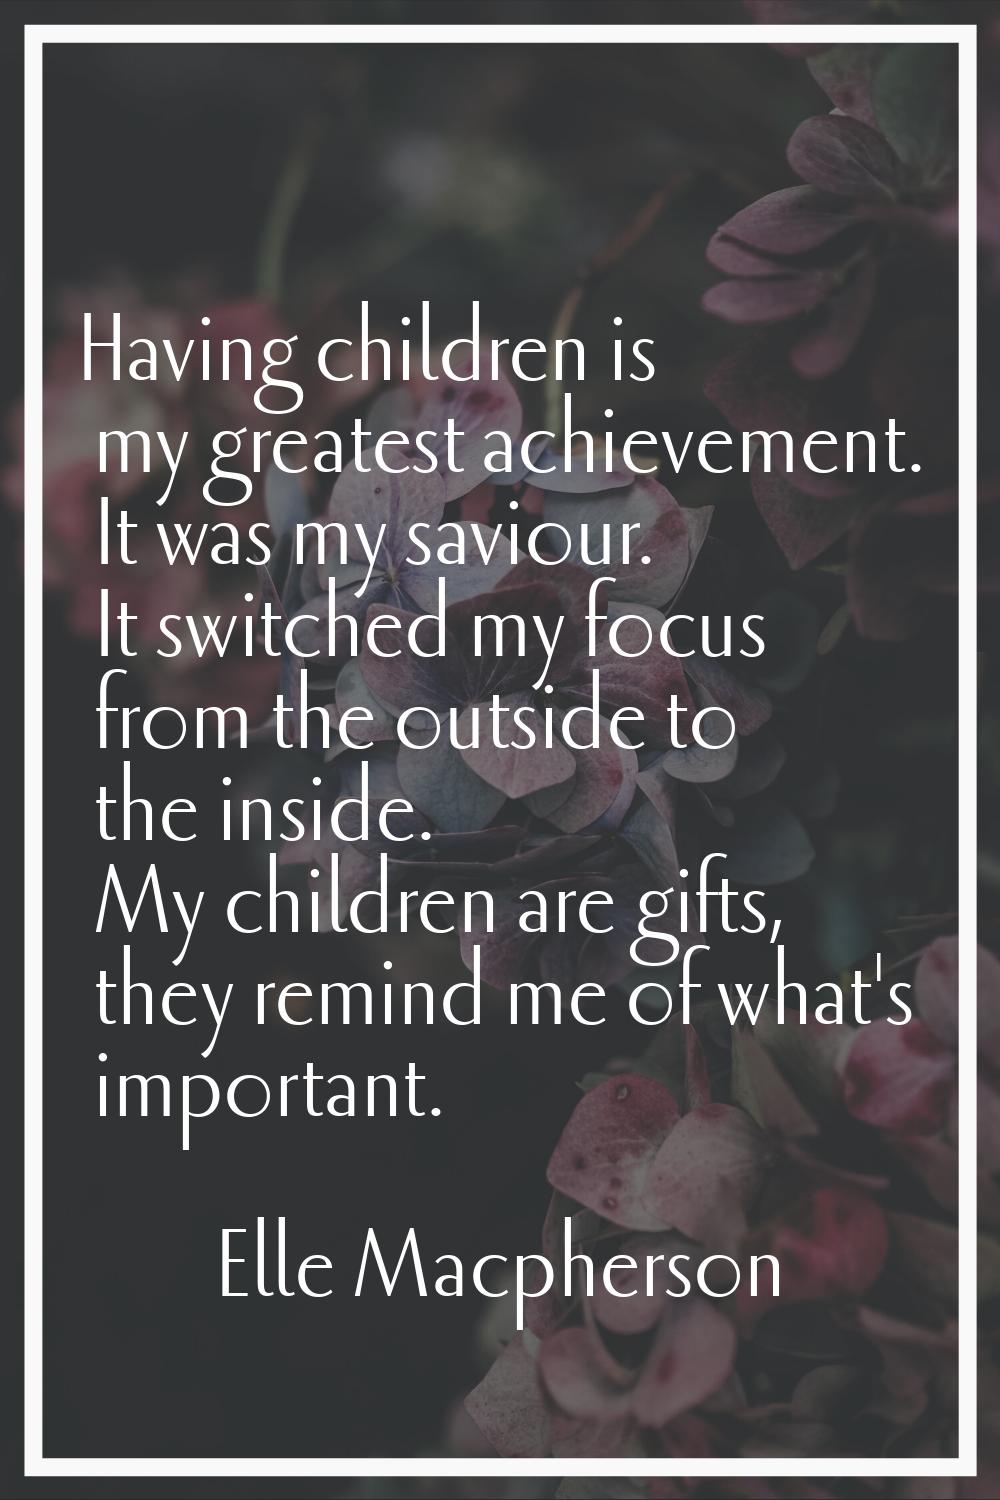 Having children is my greatest achievement. It was my saviour. It switched my focus from the outsid